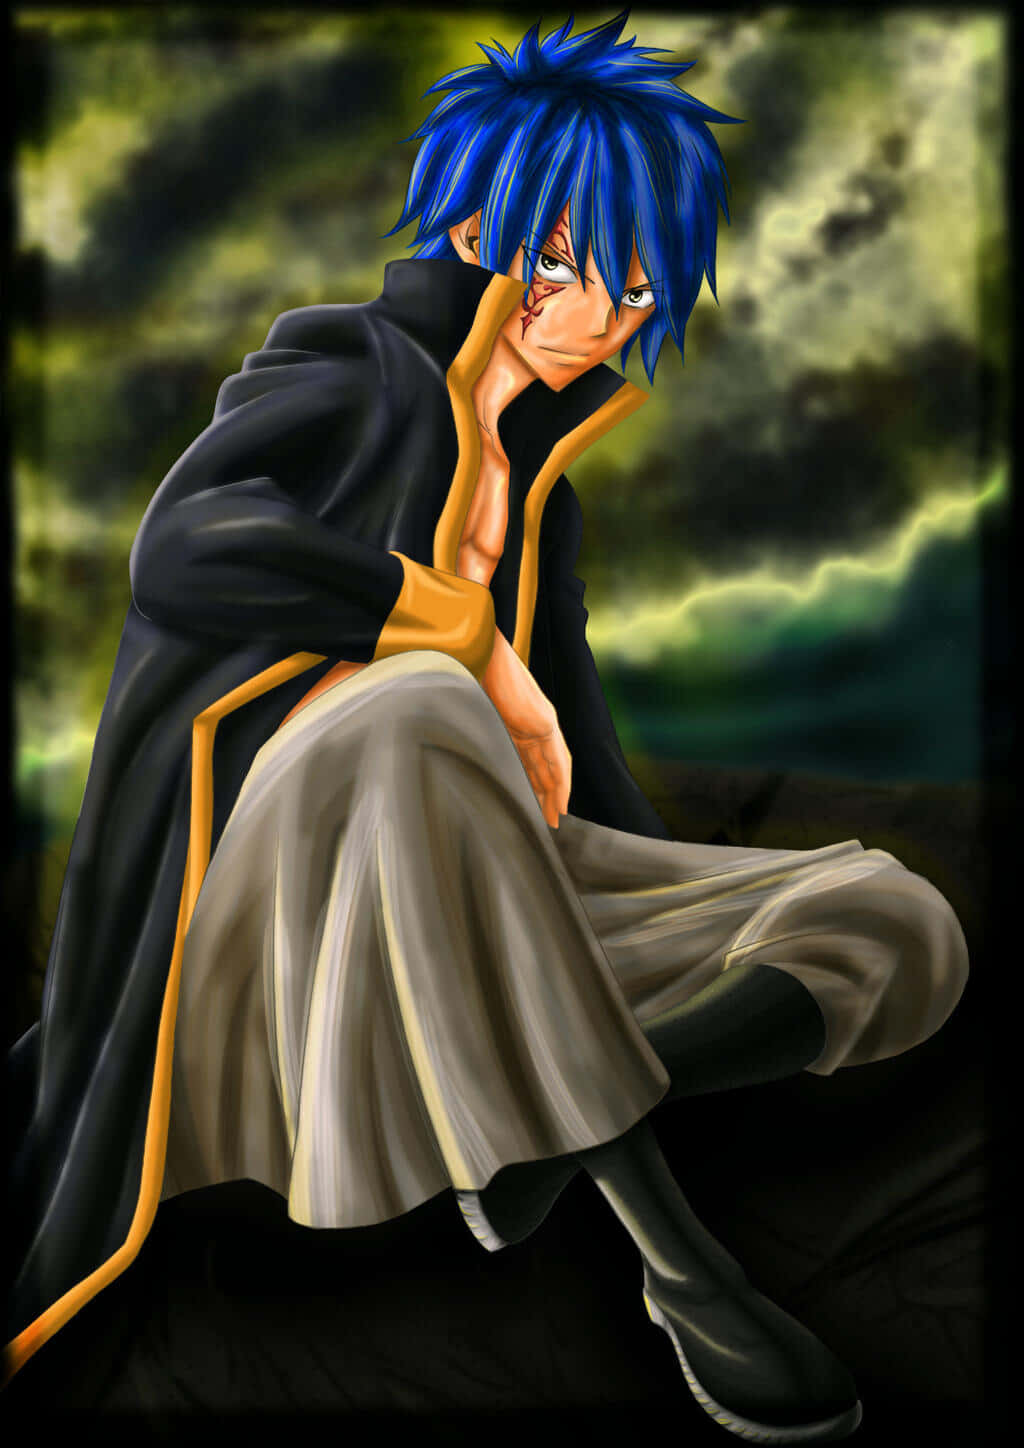 Jellal Fernandes from Fairy Tail Anime Wallpaper